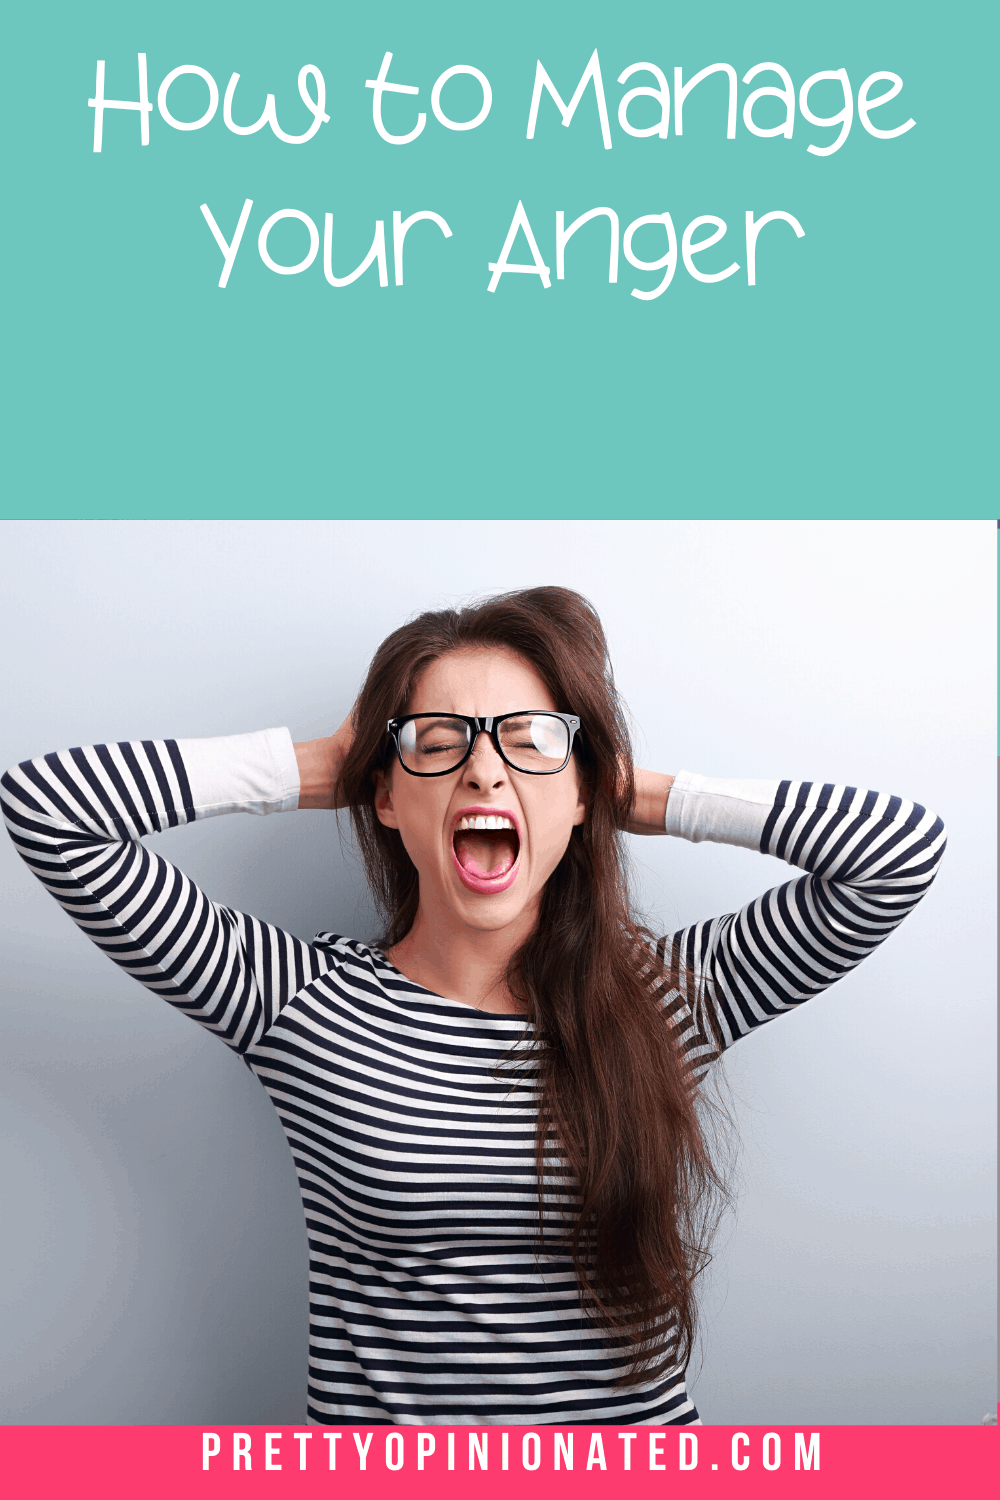 Anger wreaks havoc on your health, not to mention your relationships! I used to be mad all the time, but this little anger management trick really helped me learn to control it. Check it out!